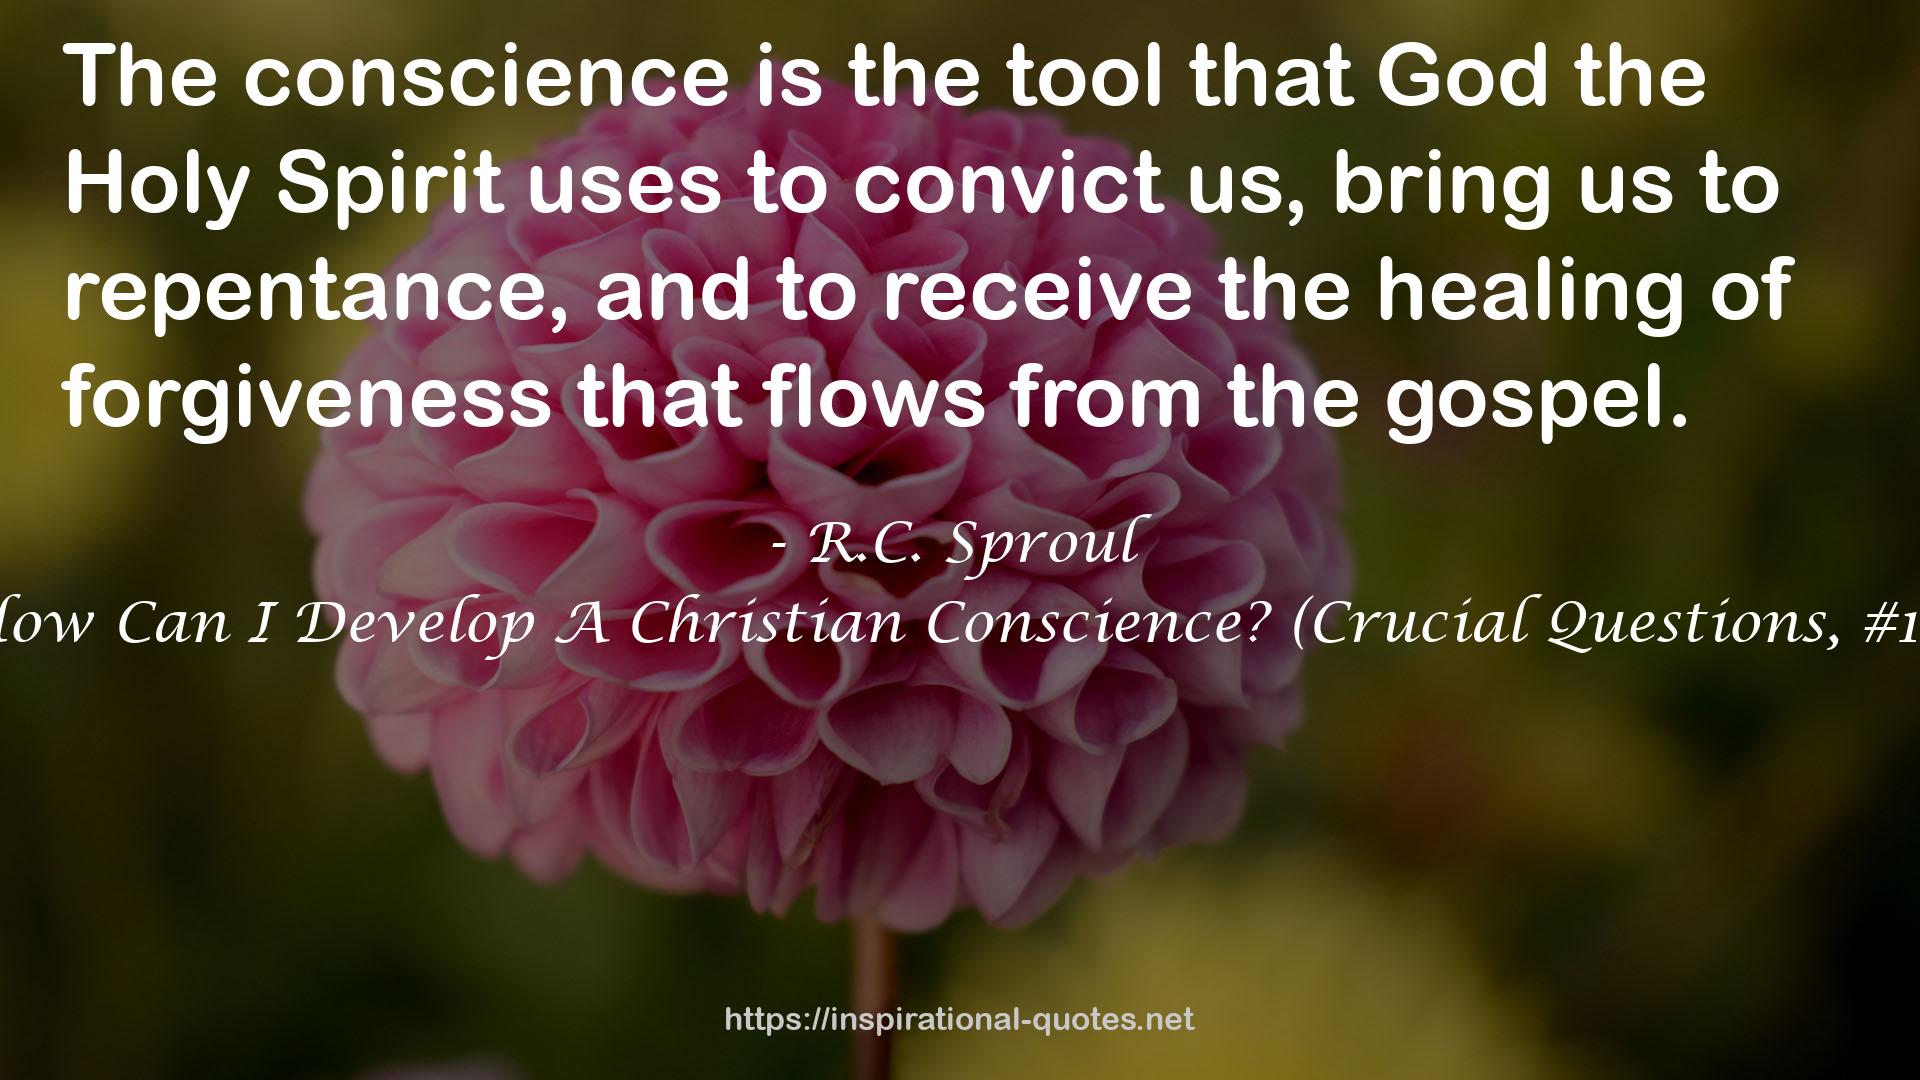 How Can I Develop A Christian Conscience? (Crucial Questions, #15) QUOTES